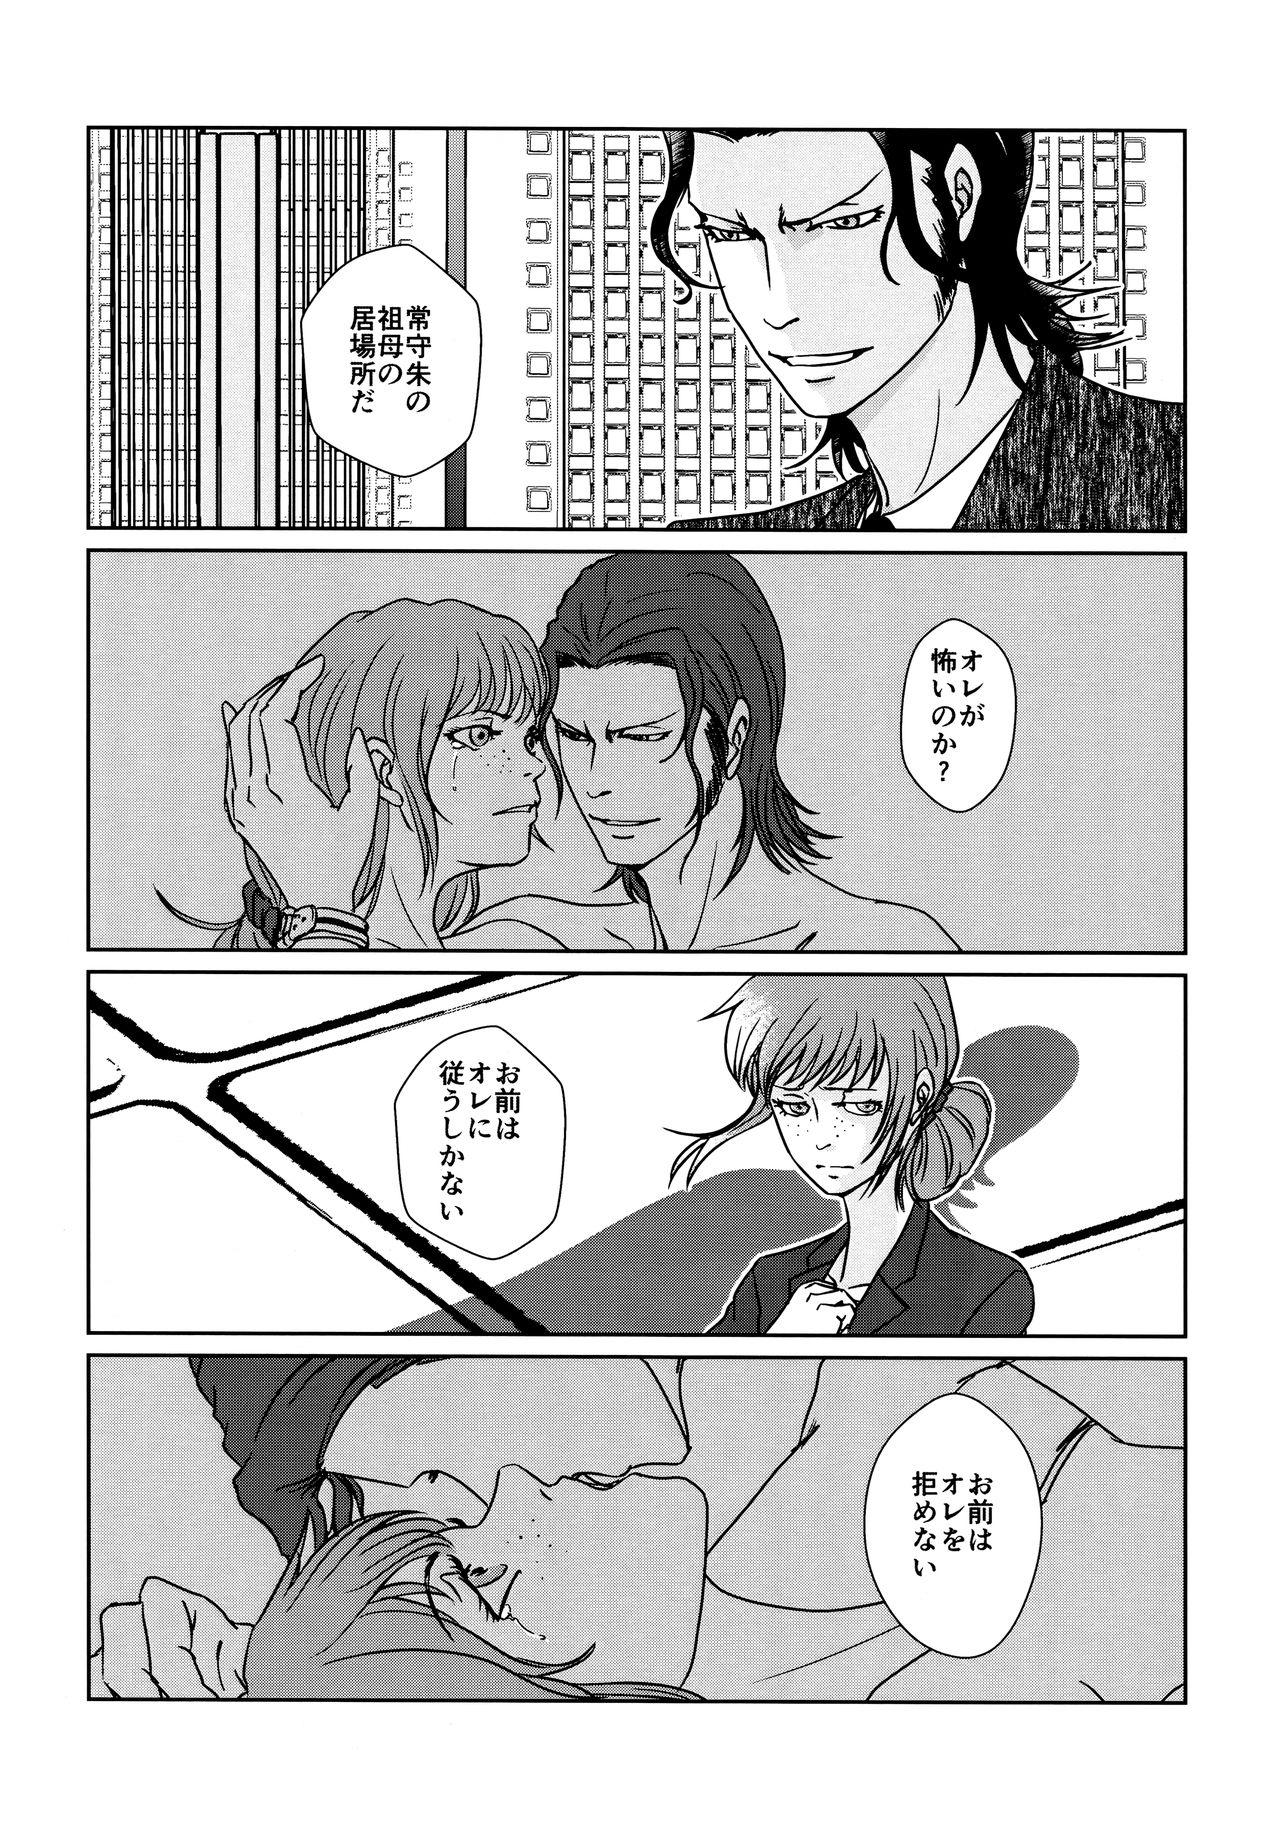 Realsex CHANGES - Psycho-pass Hot Girl - Page 7